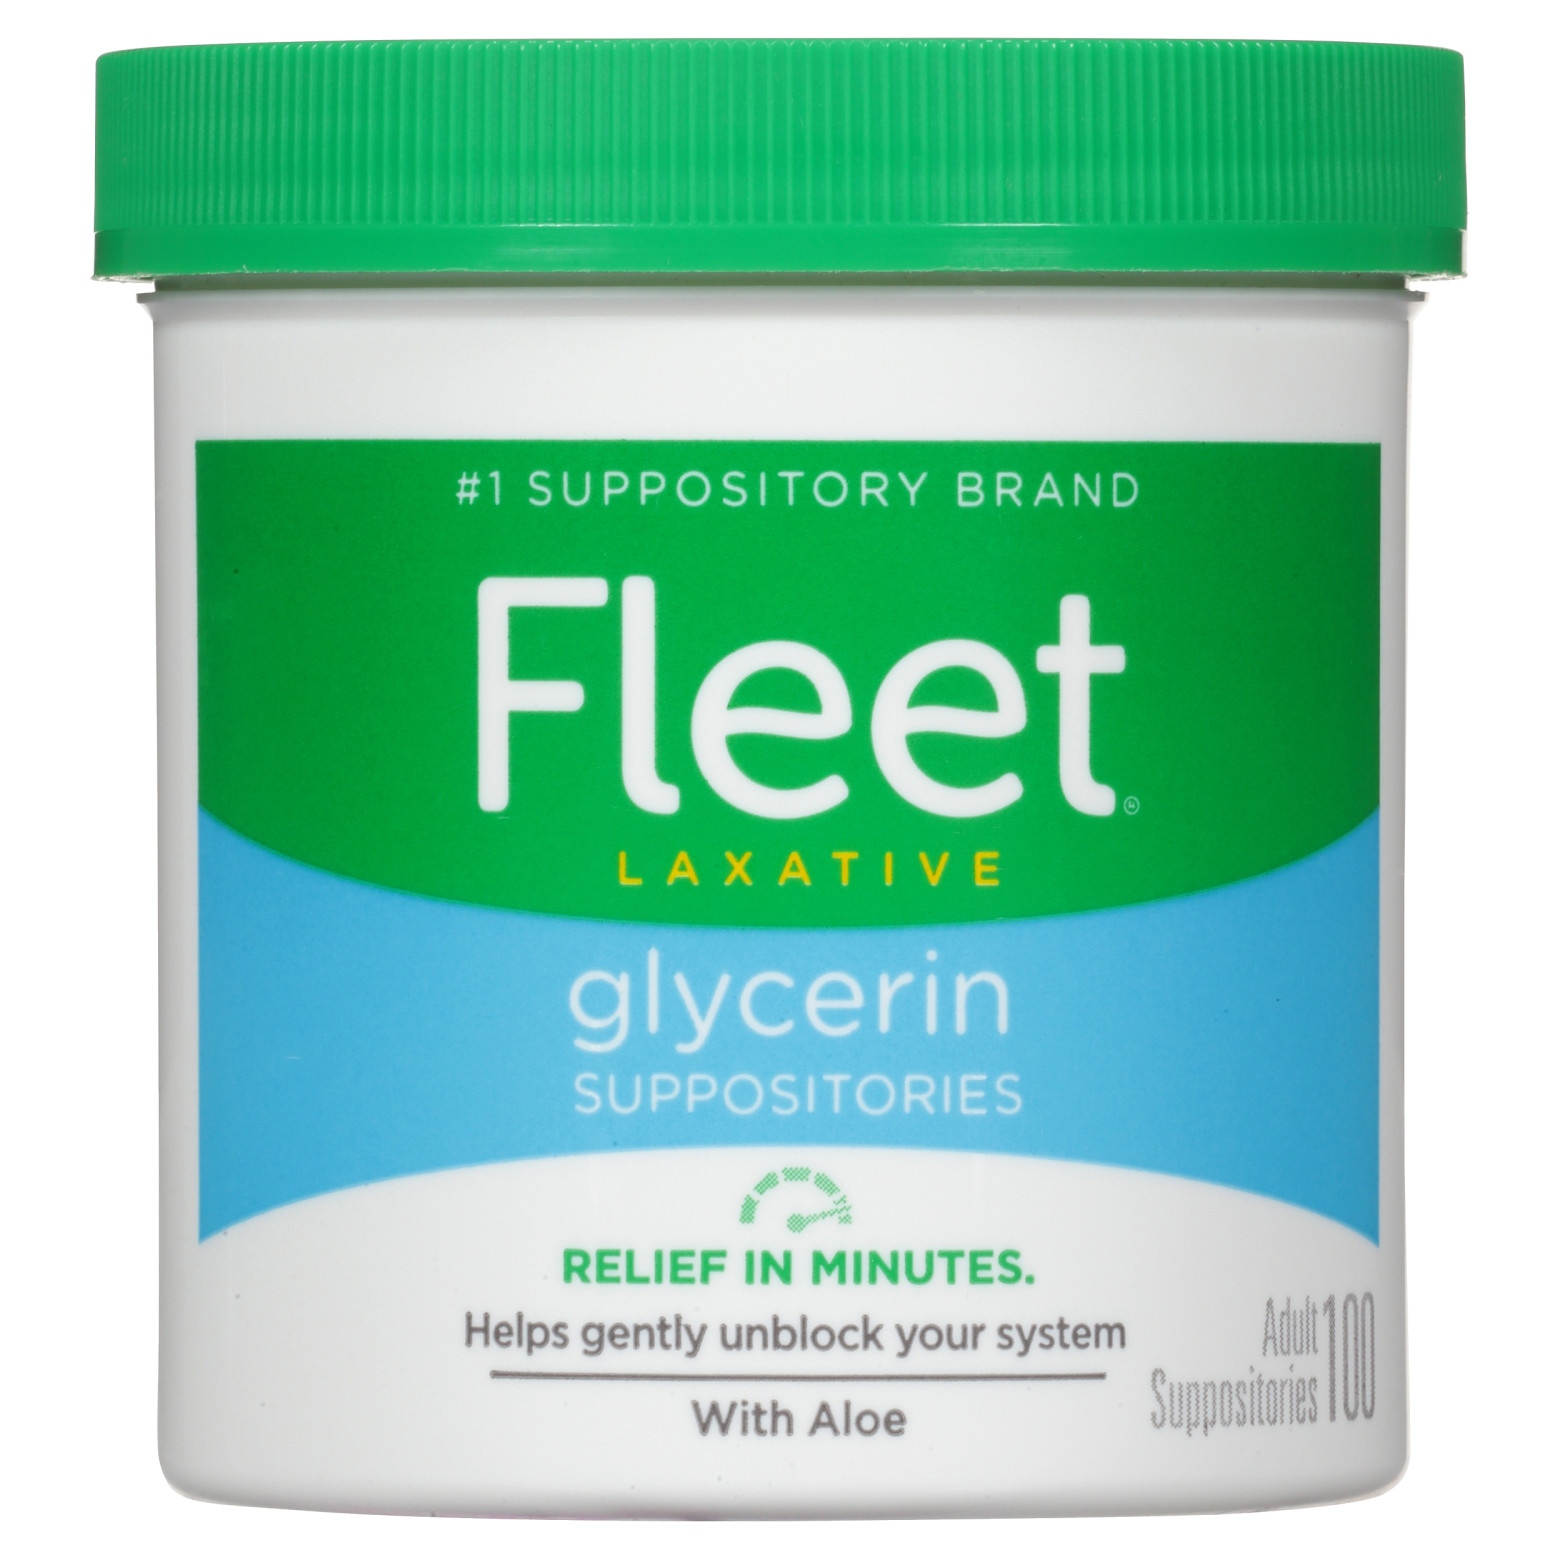 Fleet Laxative Glycerin Suppositories Adult Suppositories, 100 Count - image 5 of 13